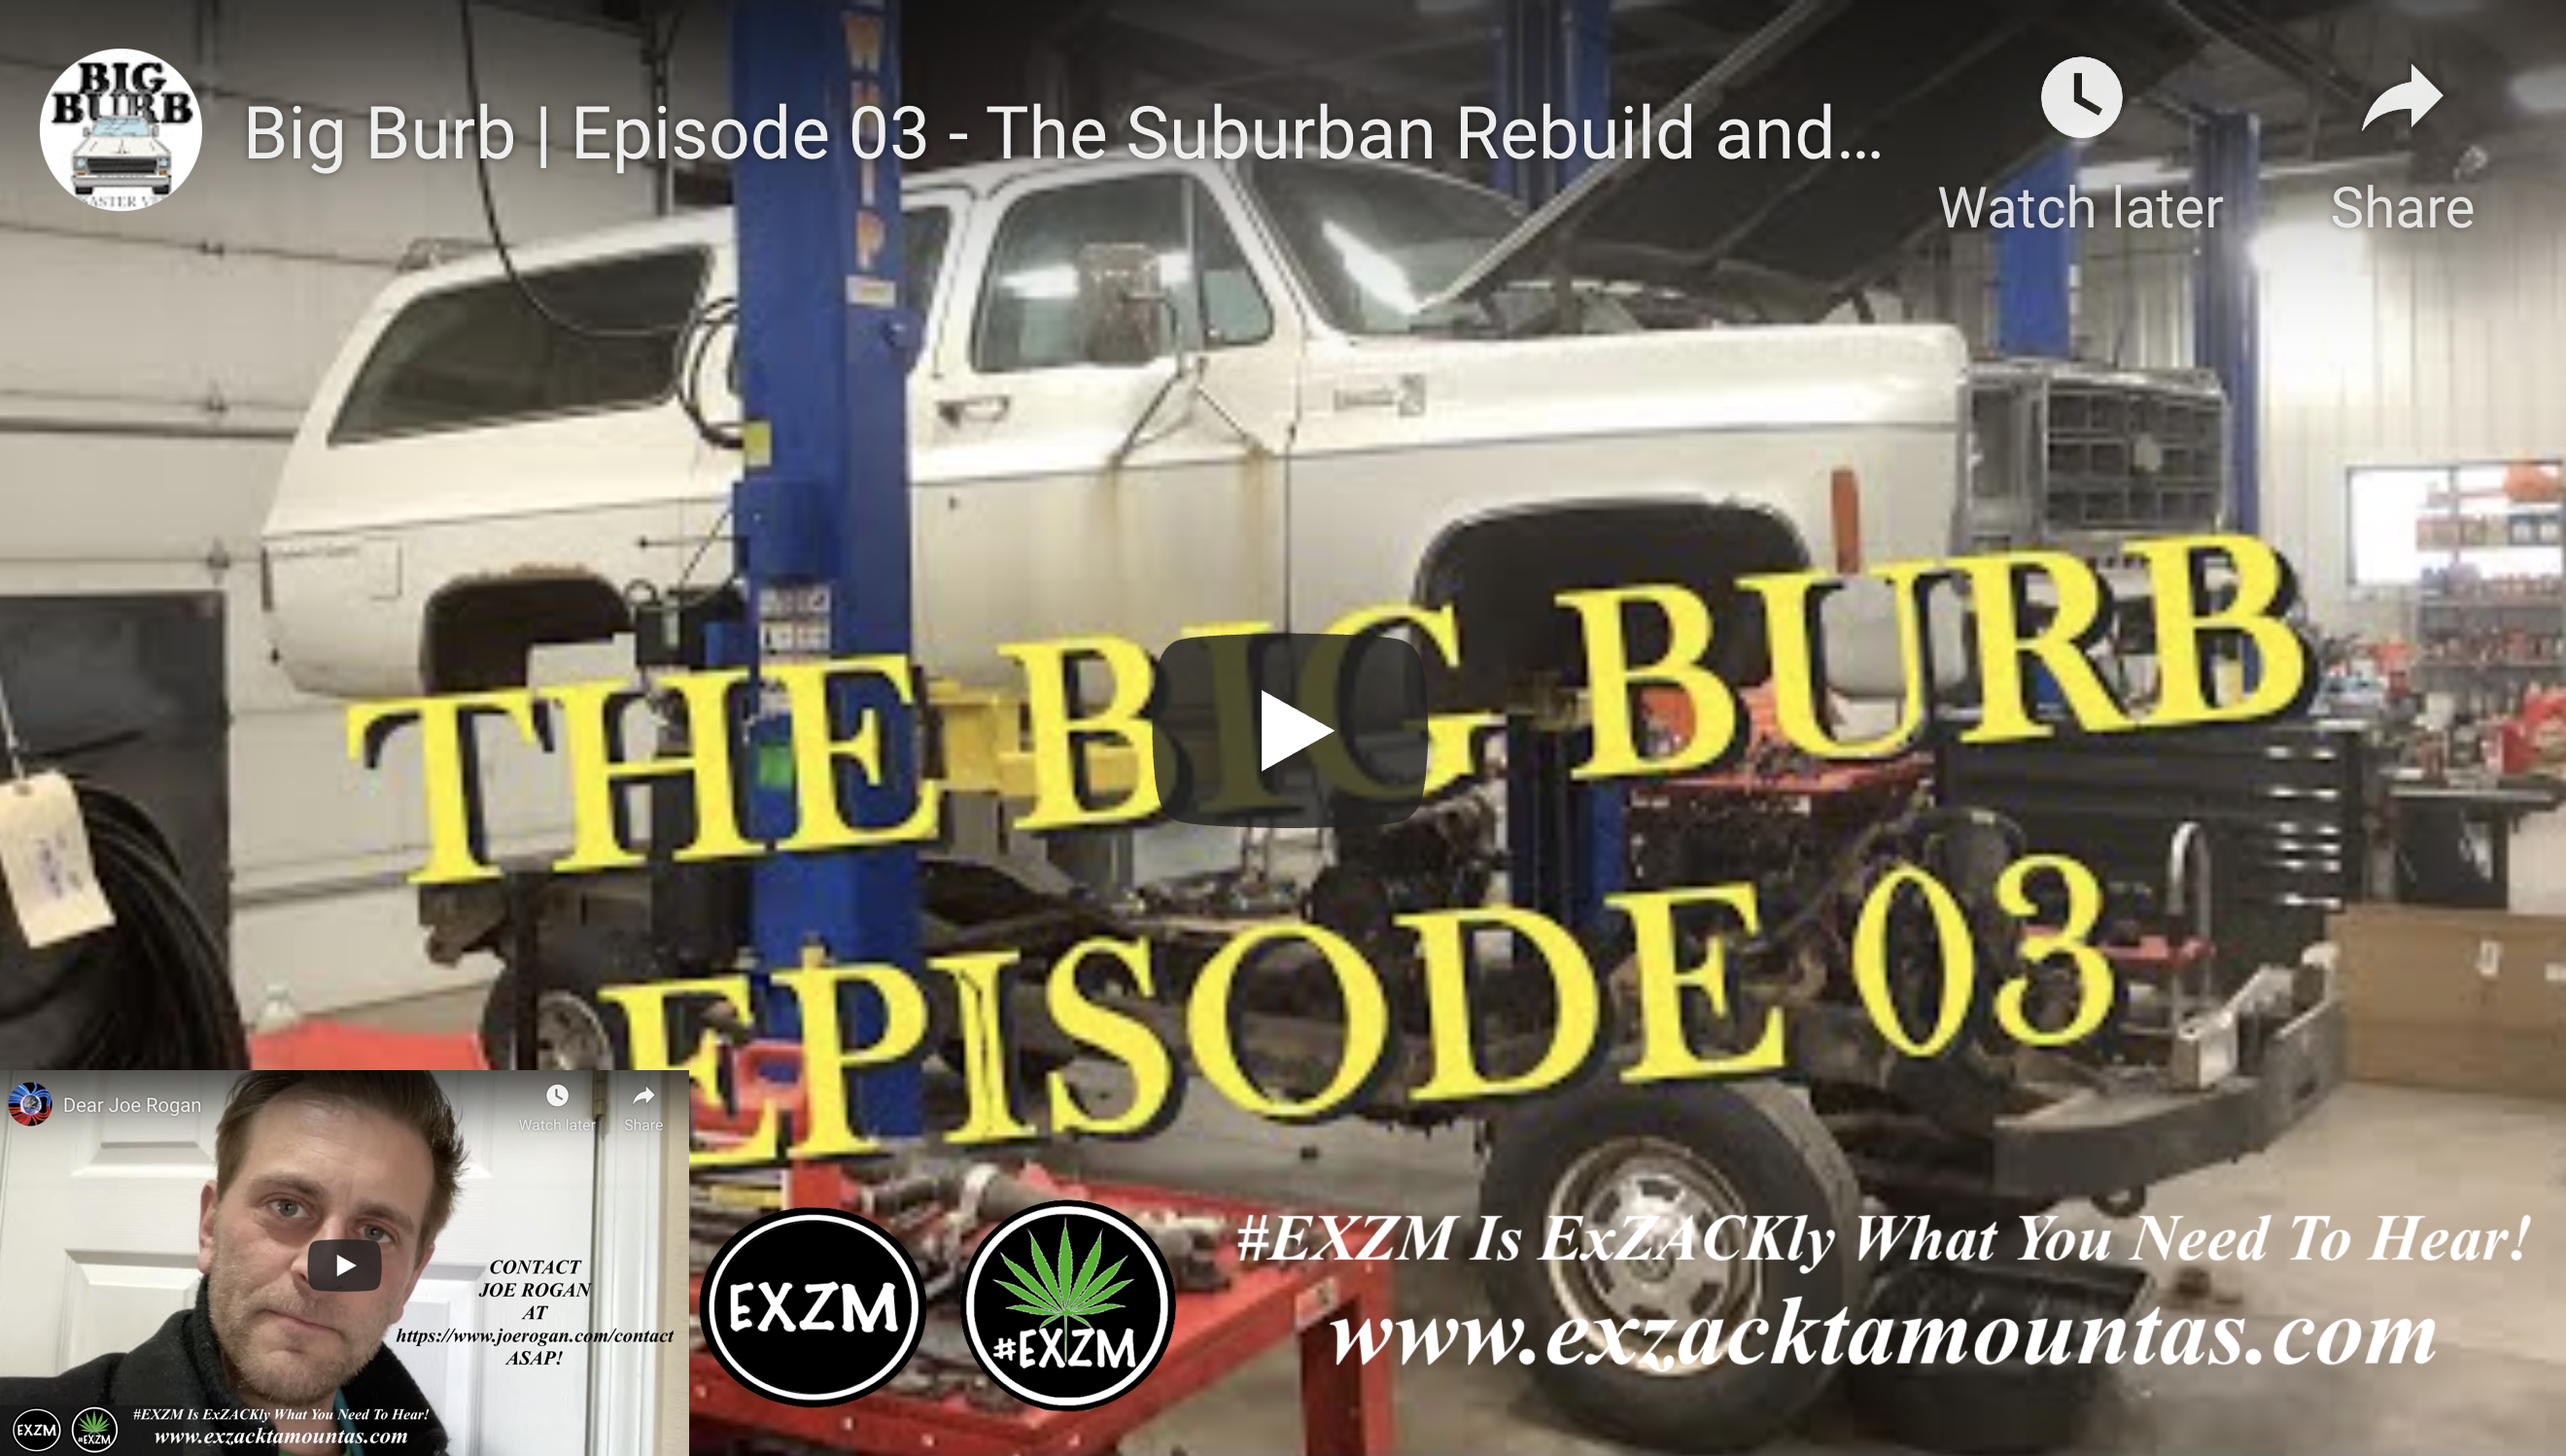 Big Burb Build Episode 3 The Suburban Rebuild and the Faraday Cage Post EXZM Zack Mount December 26th 2021